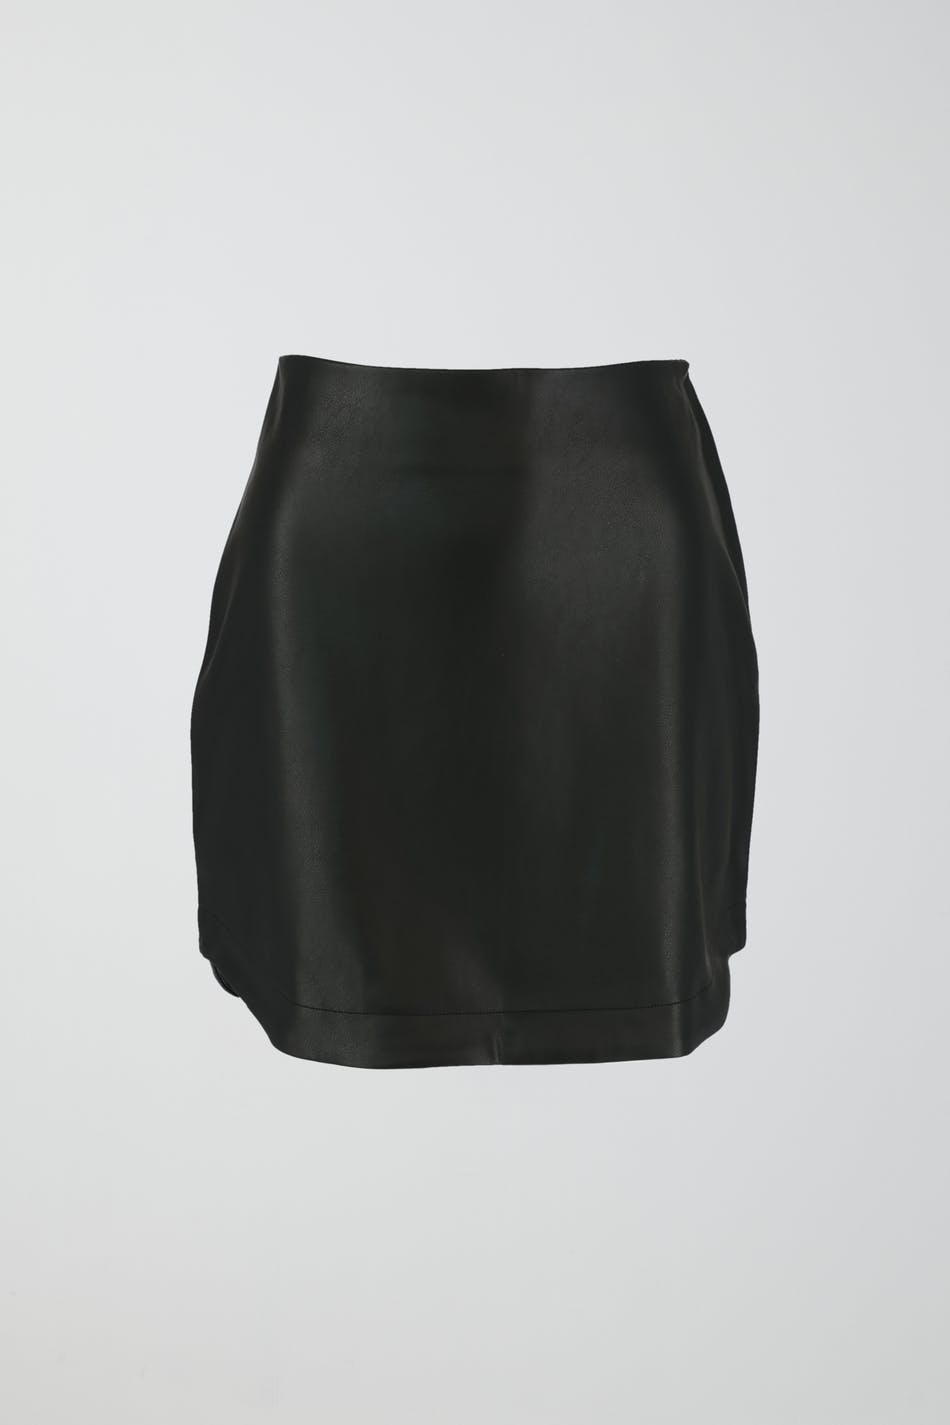  YOOTIKO Black Mini Leather Skirt High Waist Pleated Skater  Skirts Short Sexy Faux Leather Club Wear : Clothing, Shoes & Jewelry